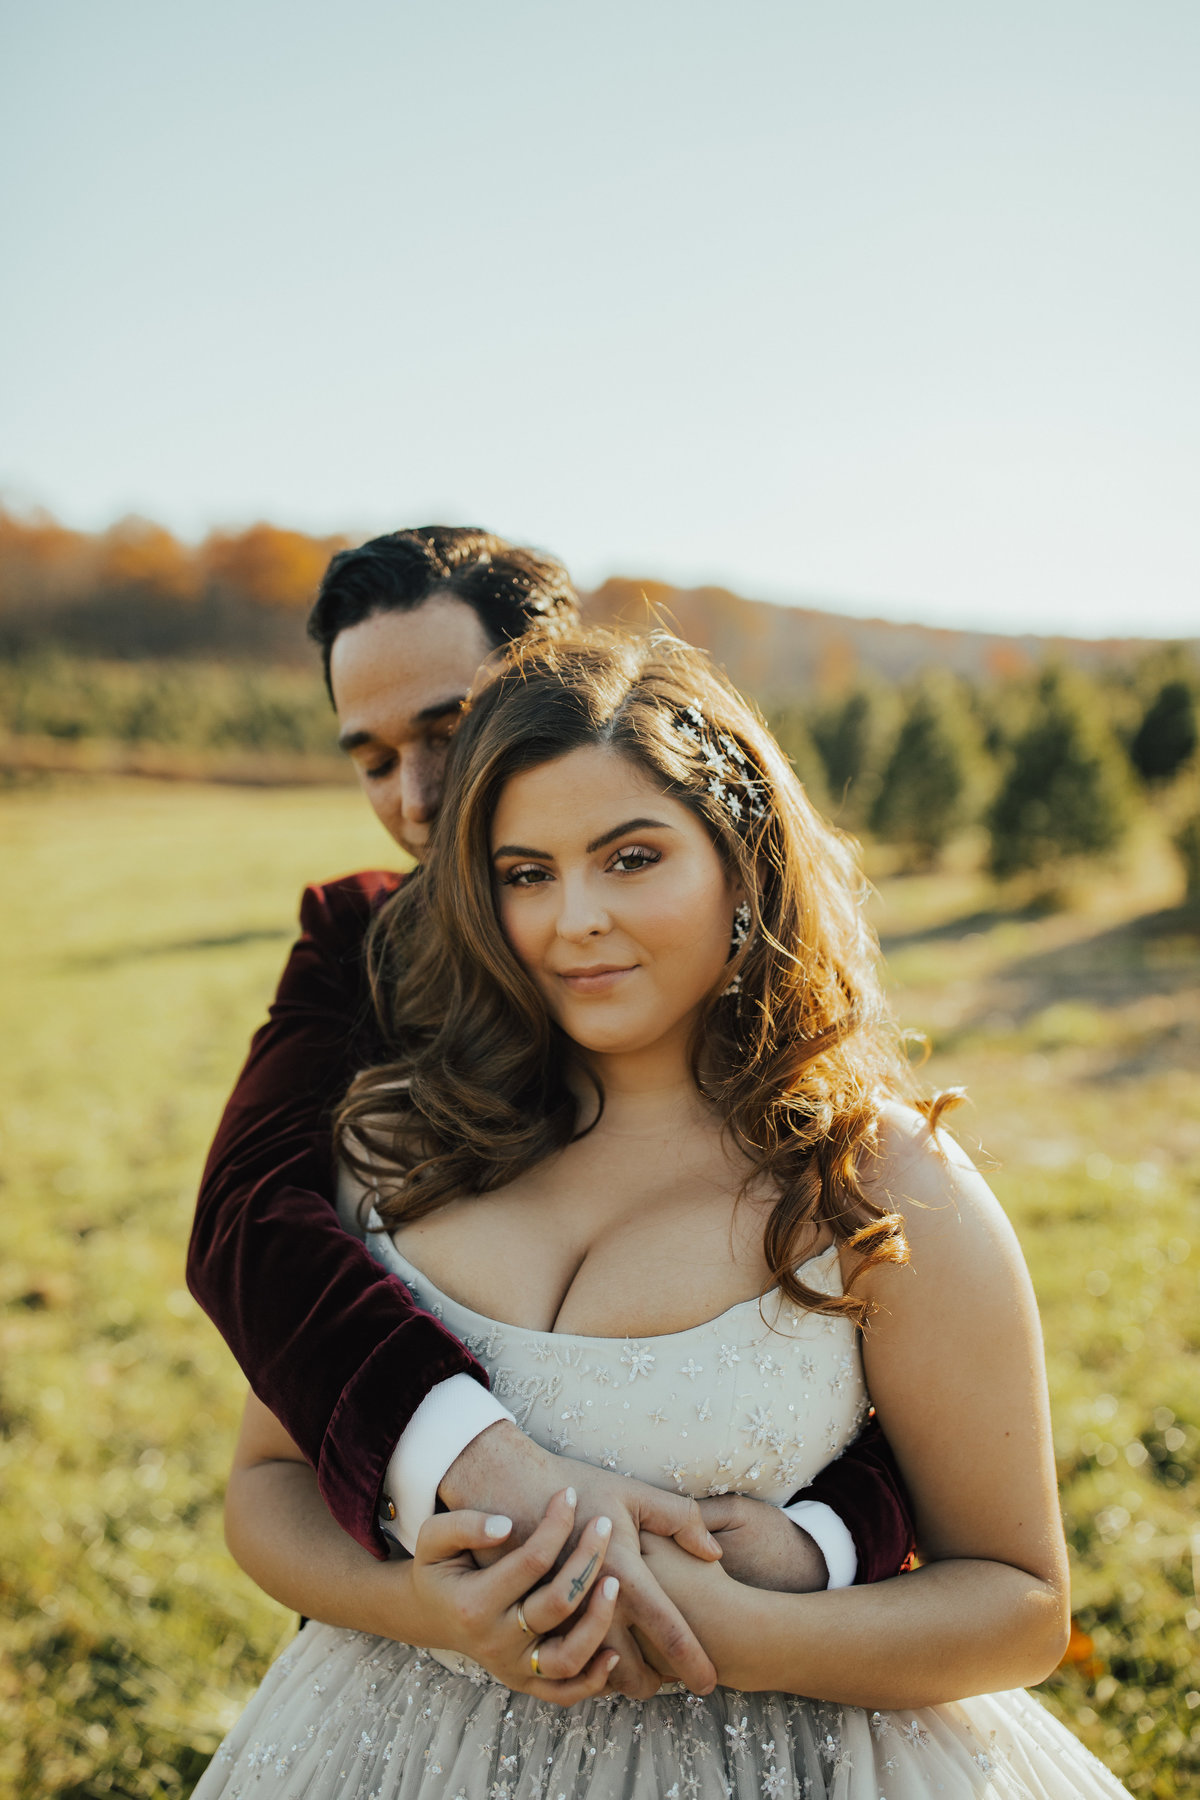 Christy-l-Johnston-Photography-Monica-Relyea-Events-Noelle-Downing-Instagram-Noelle_s-Favorite-Day-Wedding-Battenfelds-Christmas-tree-farm-Red-Hook-New-York-Hudson-Valley-upstate-november-2019-AP1A7686